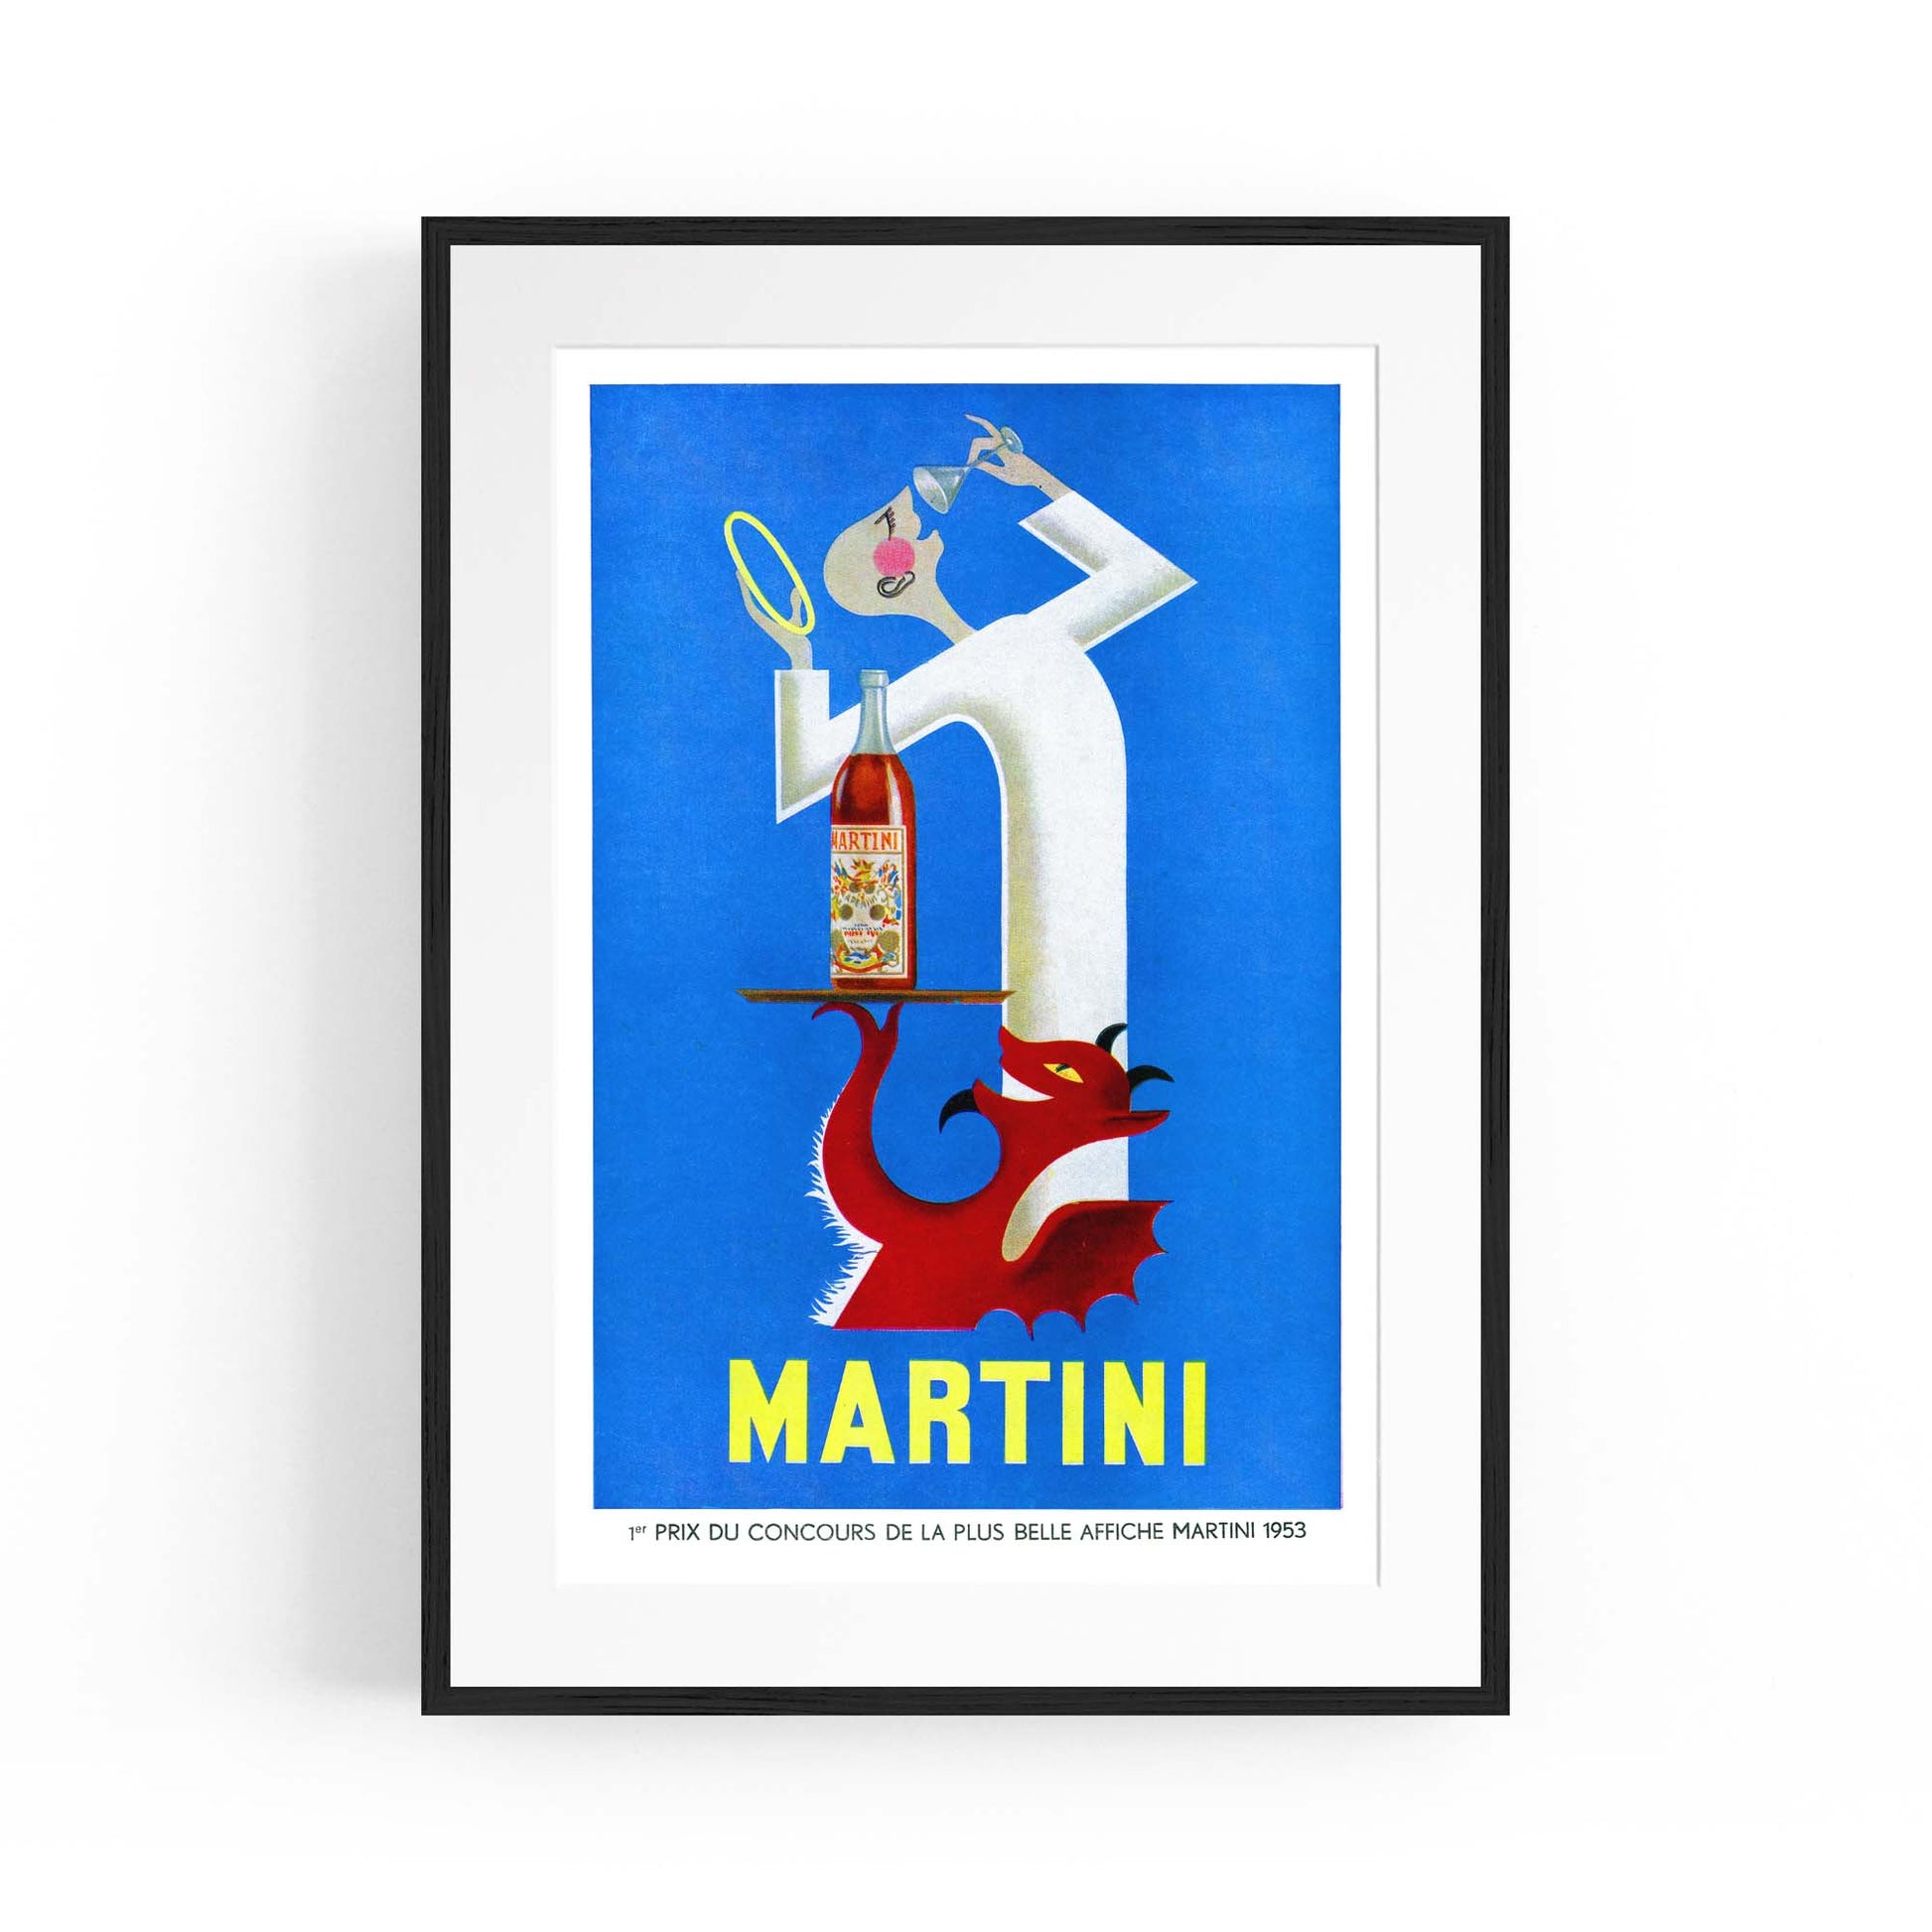 Martini "Red Devil & Angel" Vintage Drinks Advert Wall Art - The Affordable Art Company